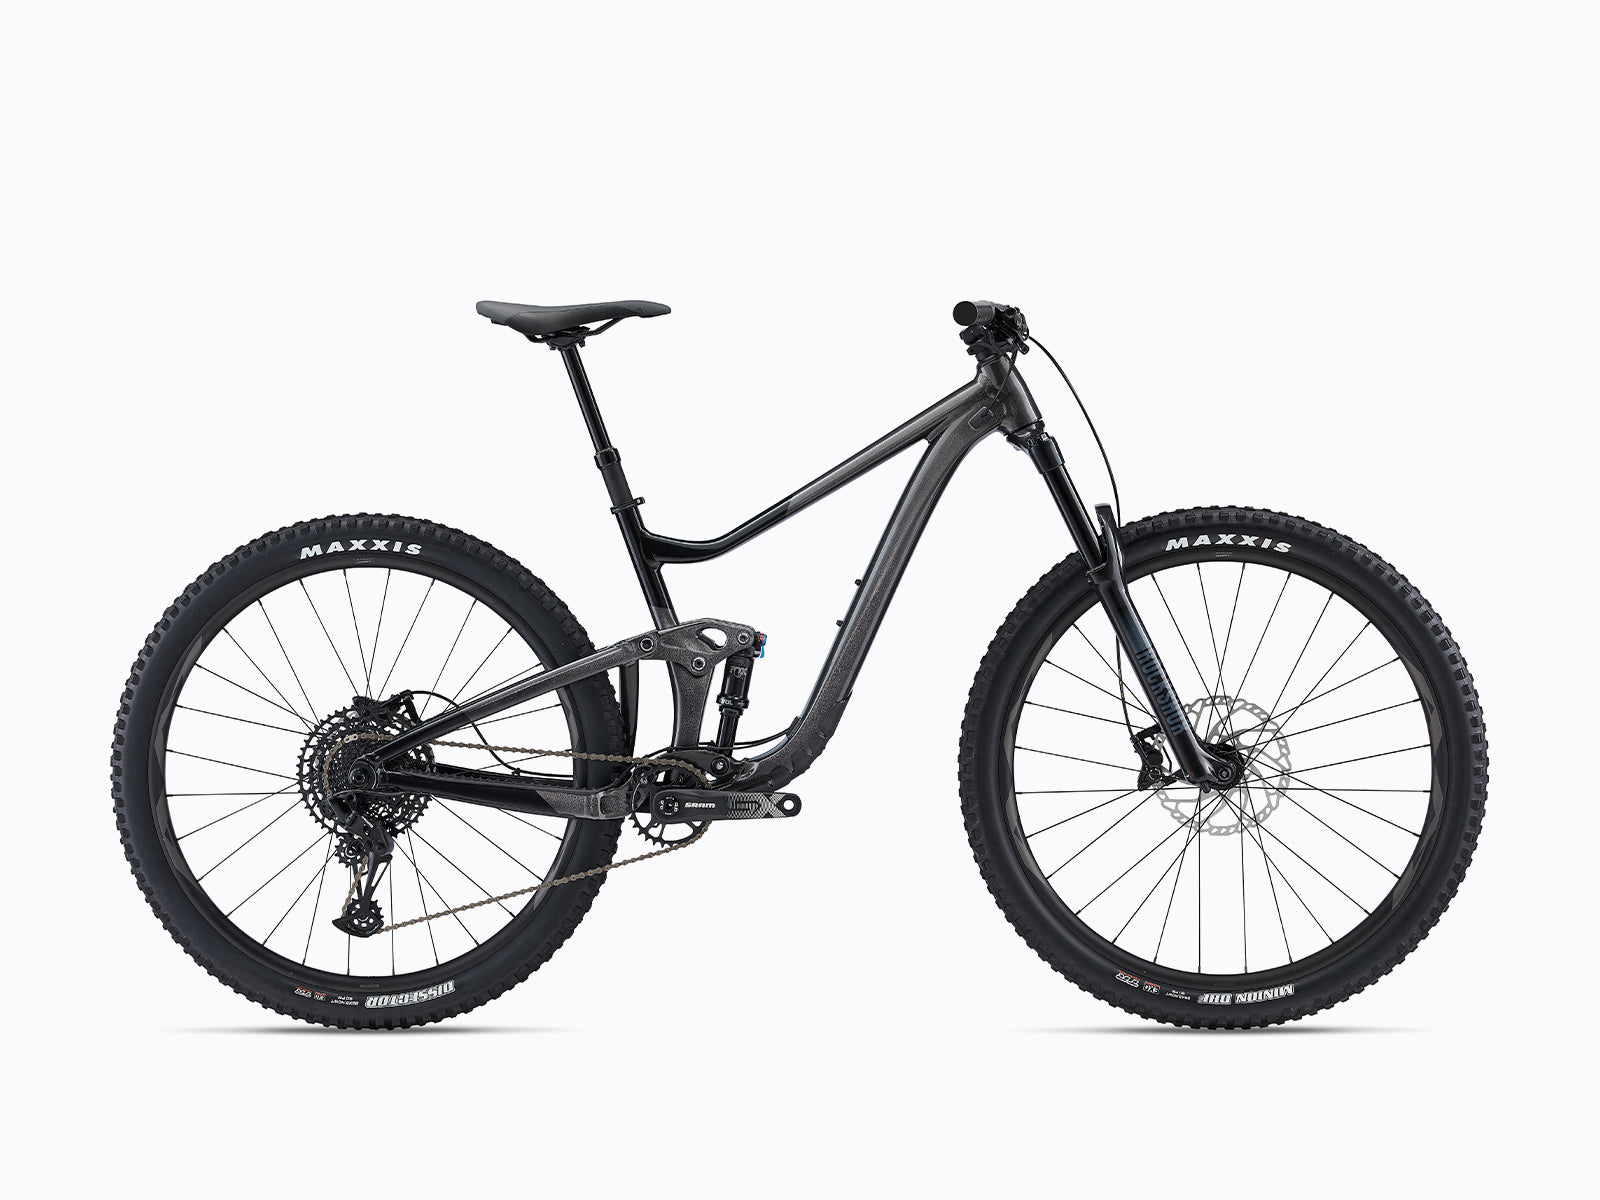 Image features a Giant Trance X 29 2, a mountain bike from giants trail bike collection now available at giant bicycles australia